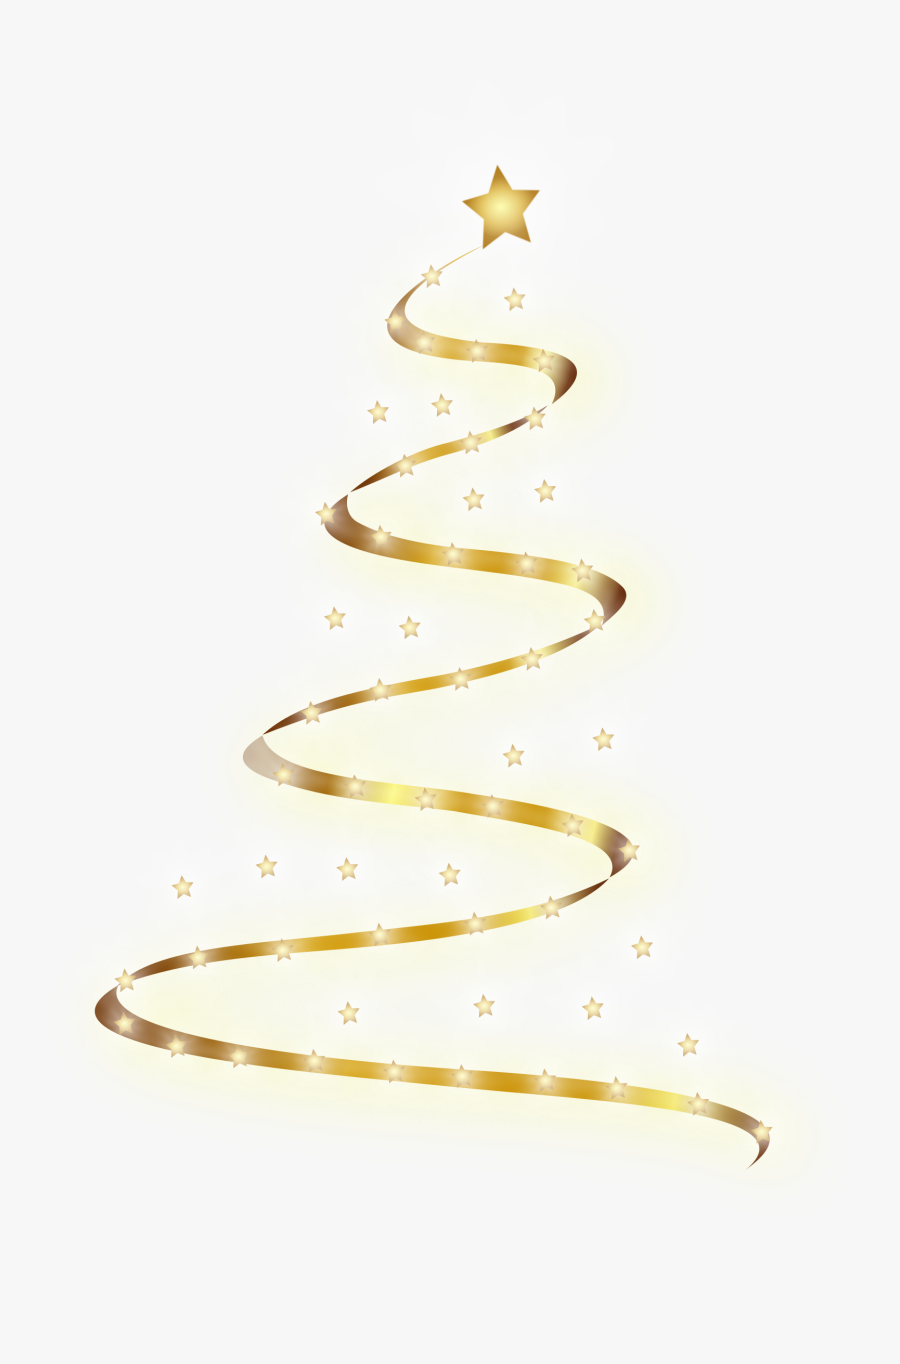 Christmas Tree Lights Png, Transparent Clipart